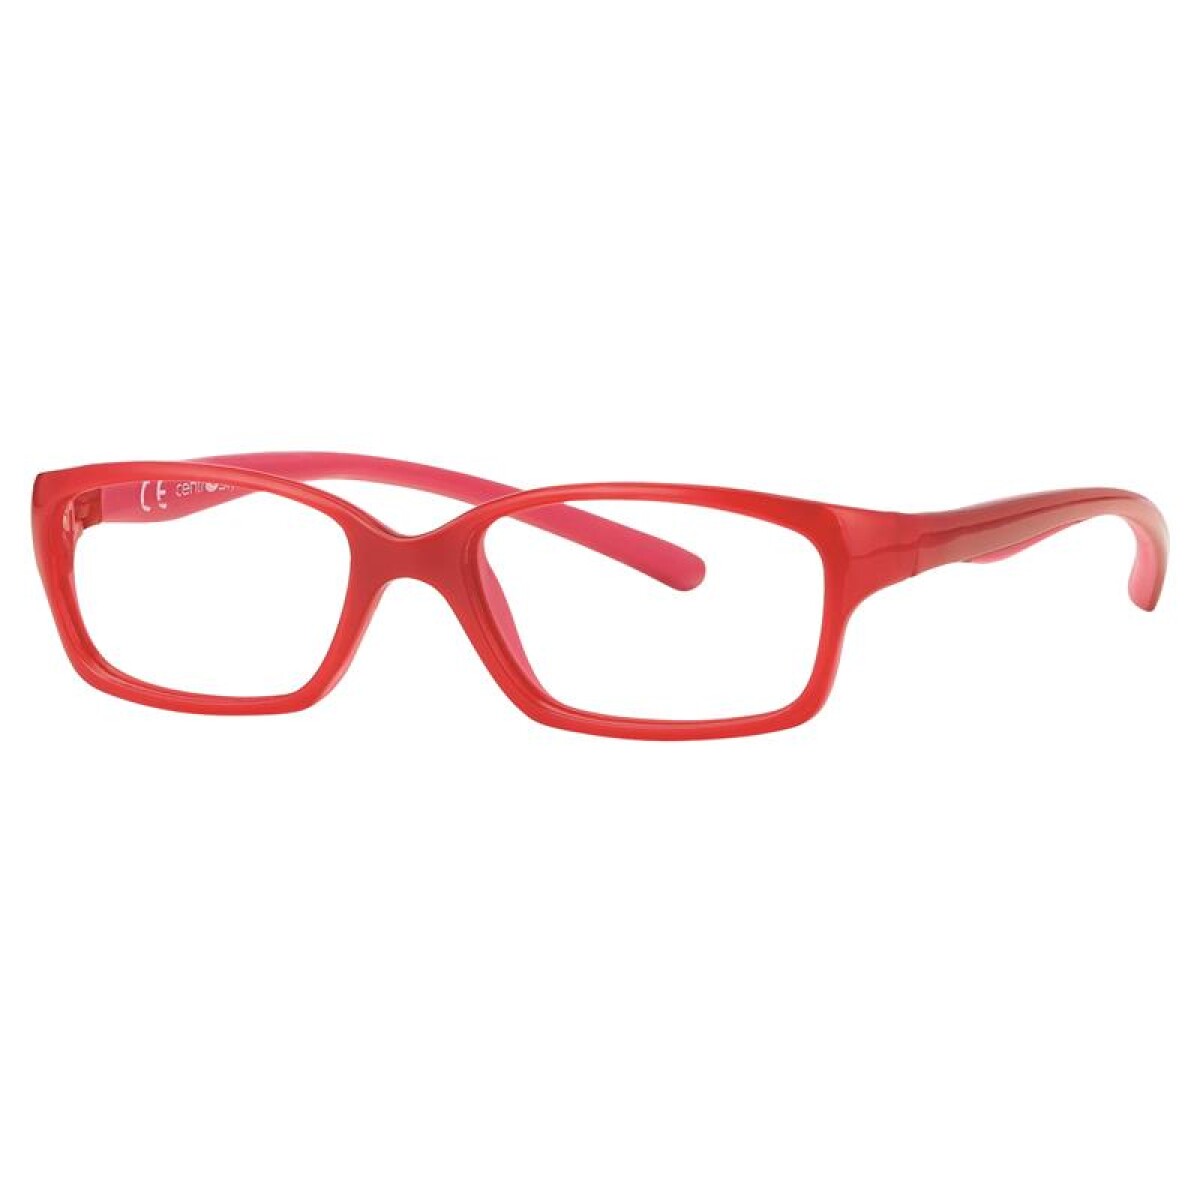 Centrostyle 15687n Active - Rojo 